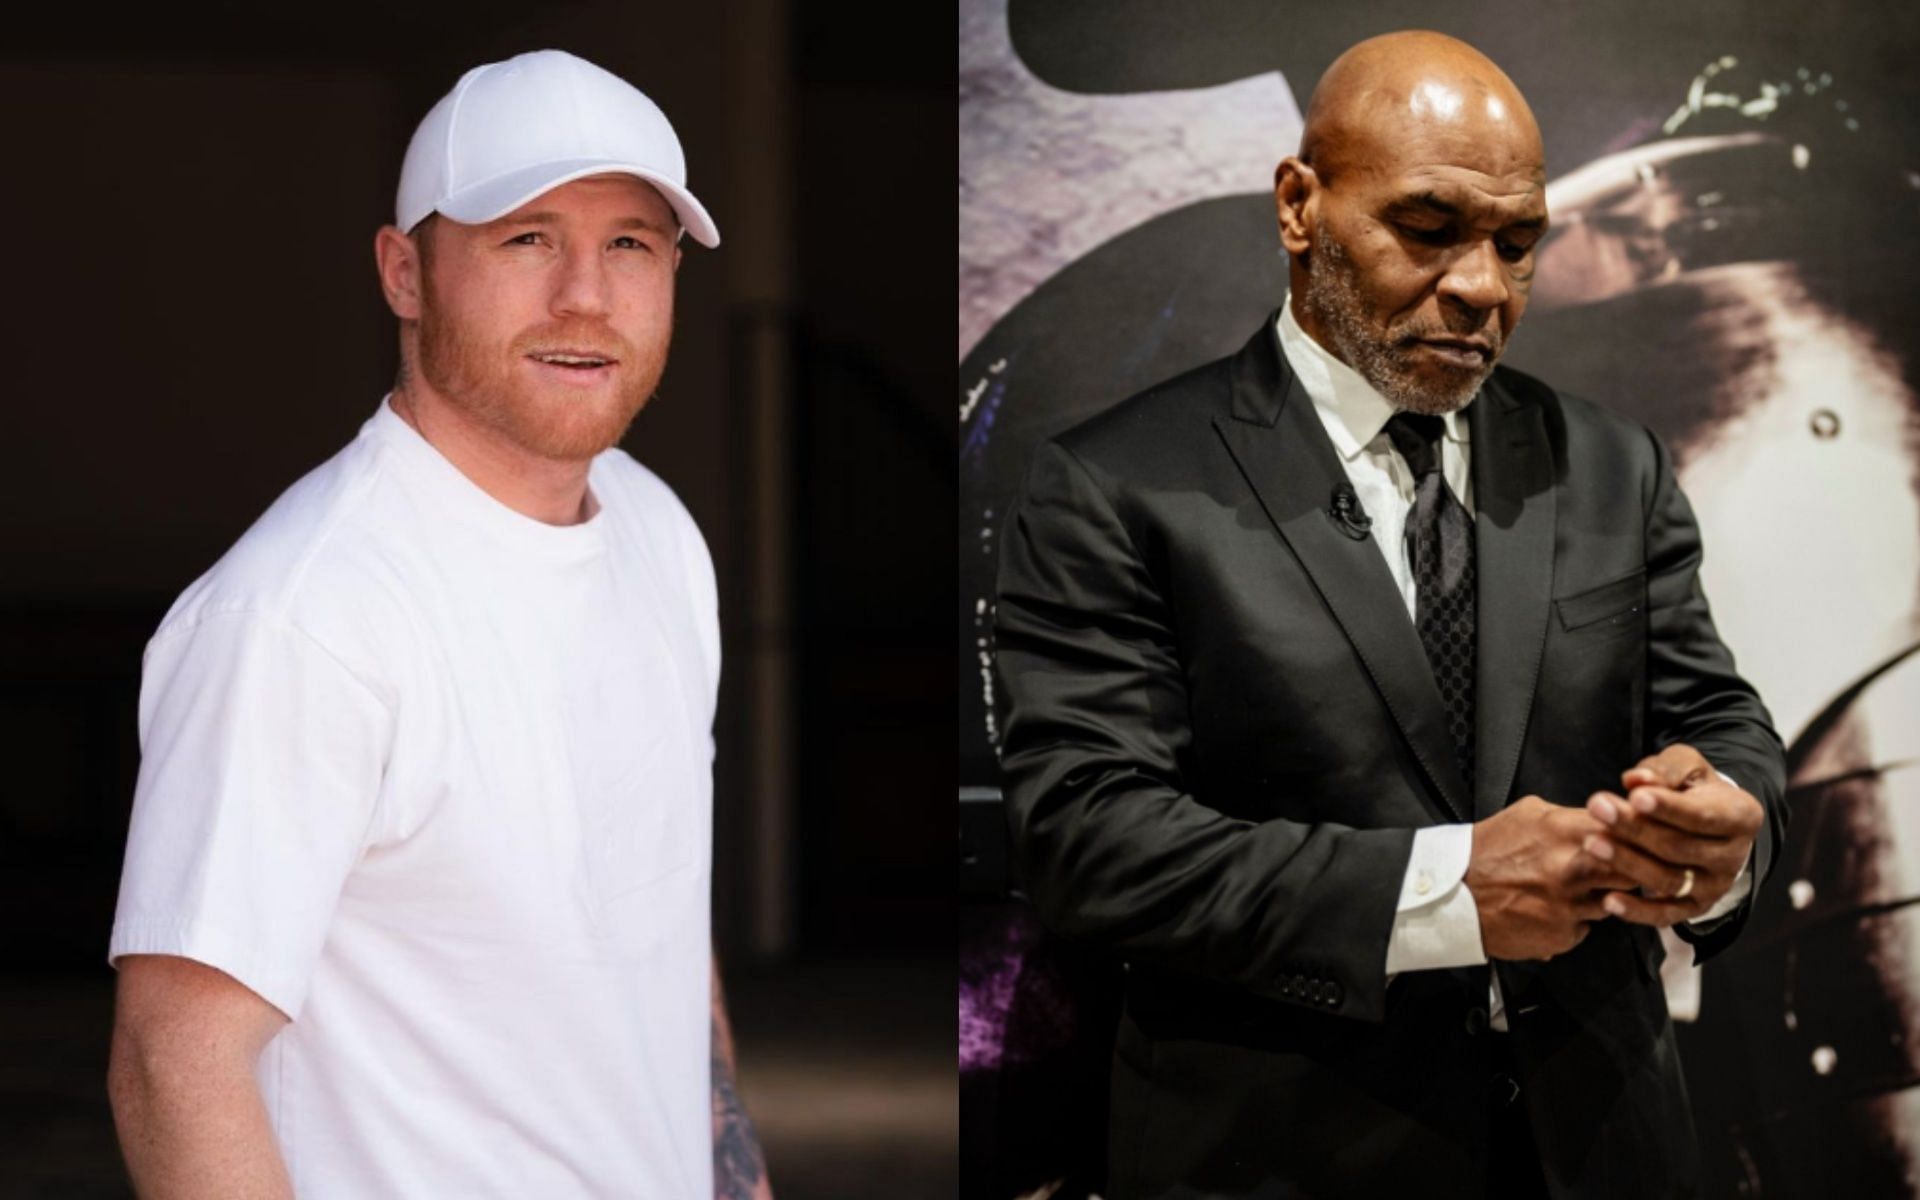 Mike Tyson has continued to take aim at Canelo Alvarez. [Images via @miketyson and @canelo on Instagram]